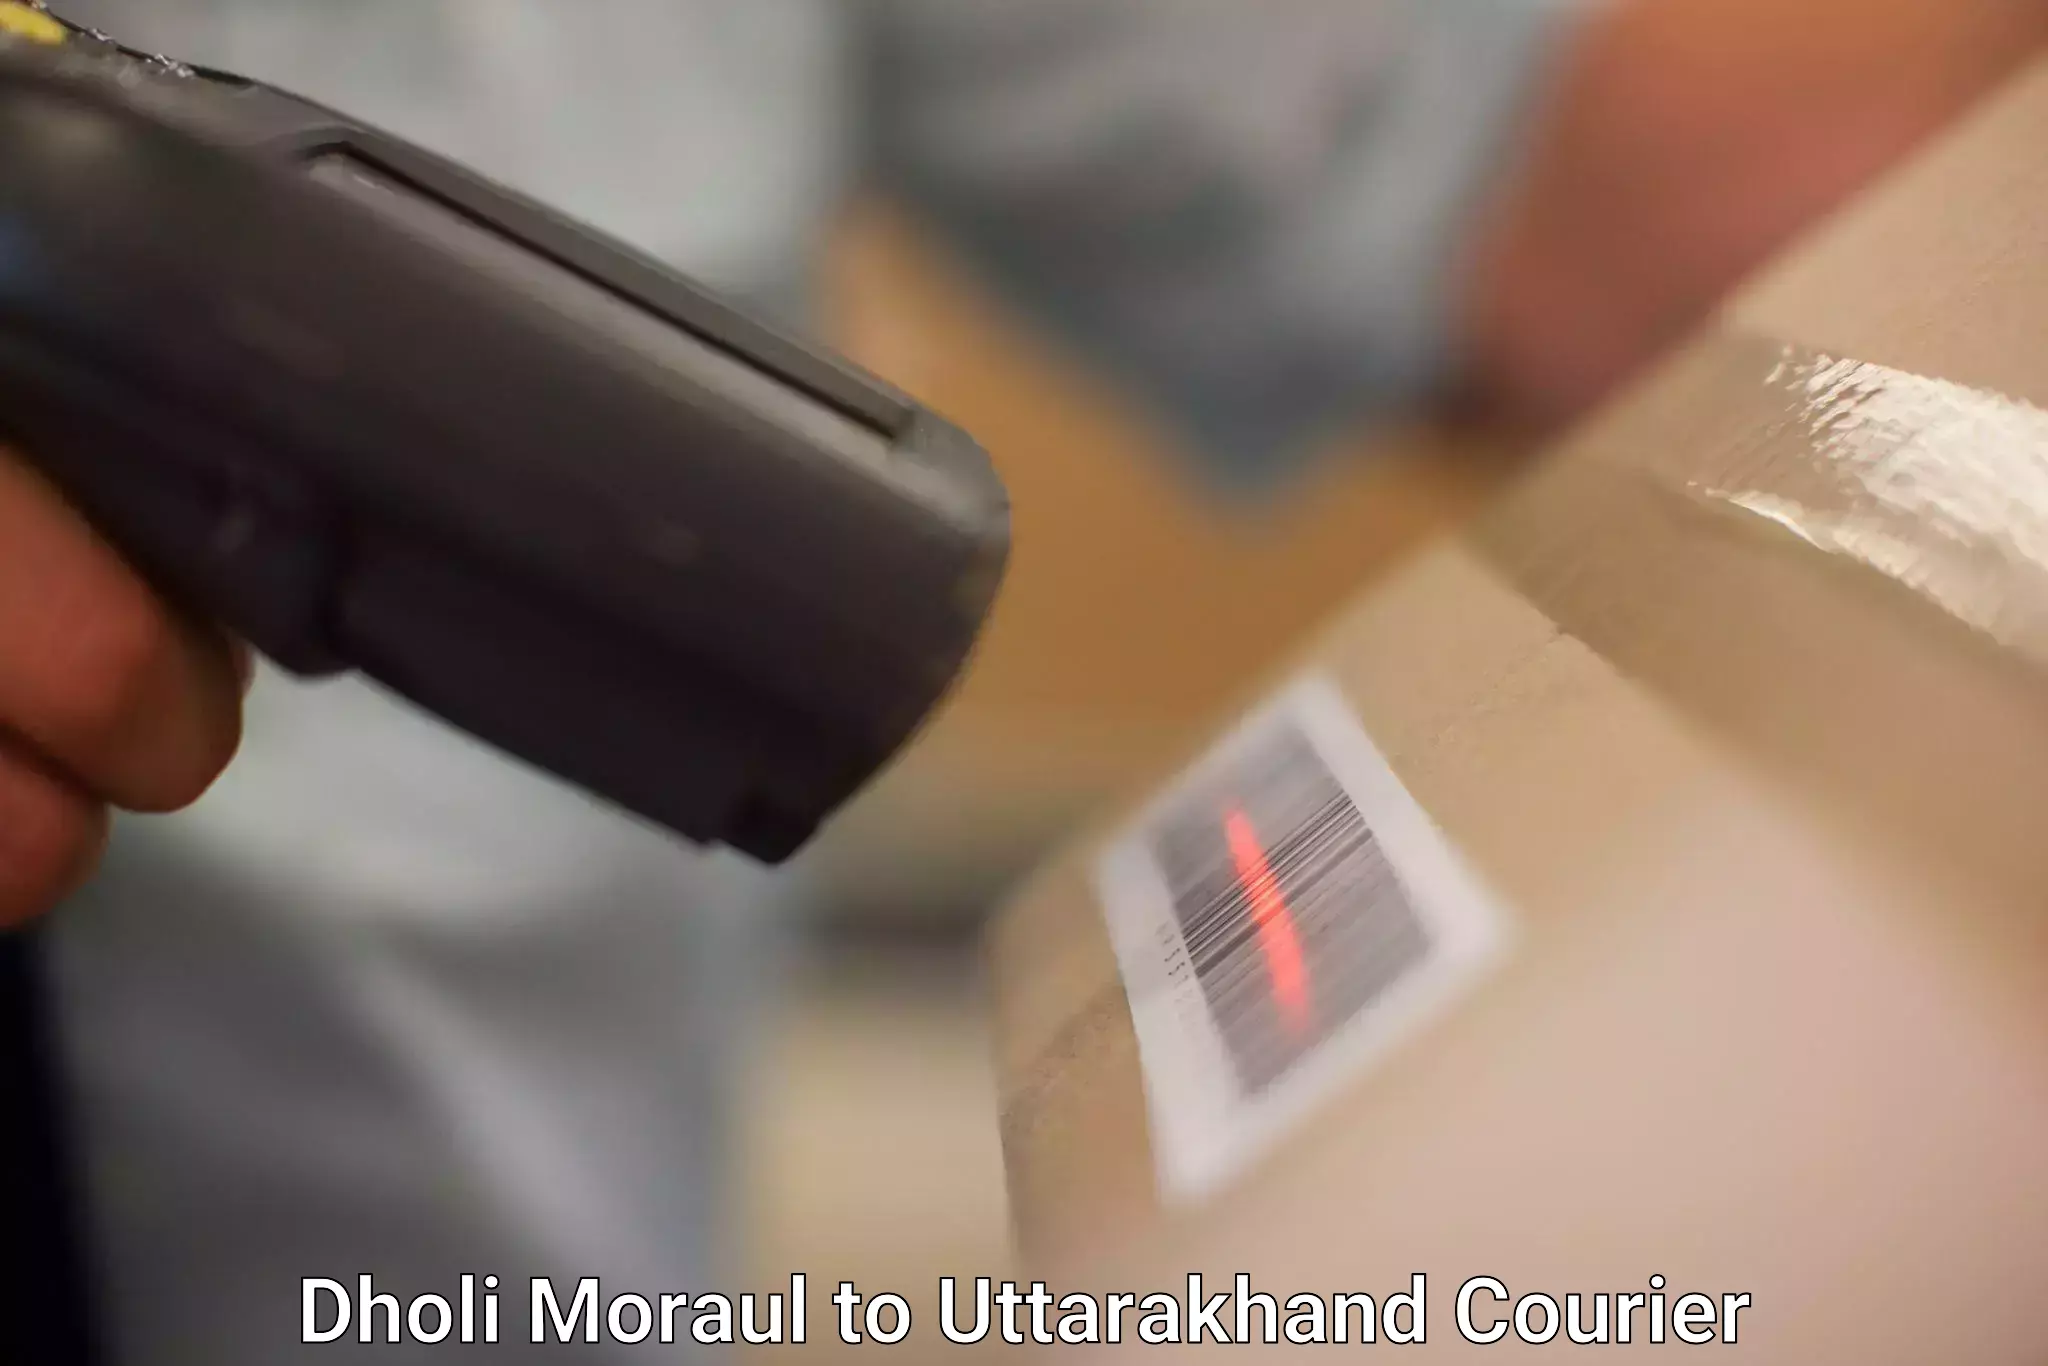 Efficient courier operations Dholi Moraul to Uttarakhand